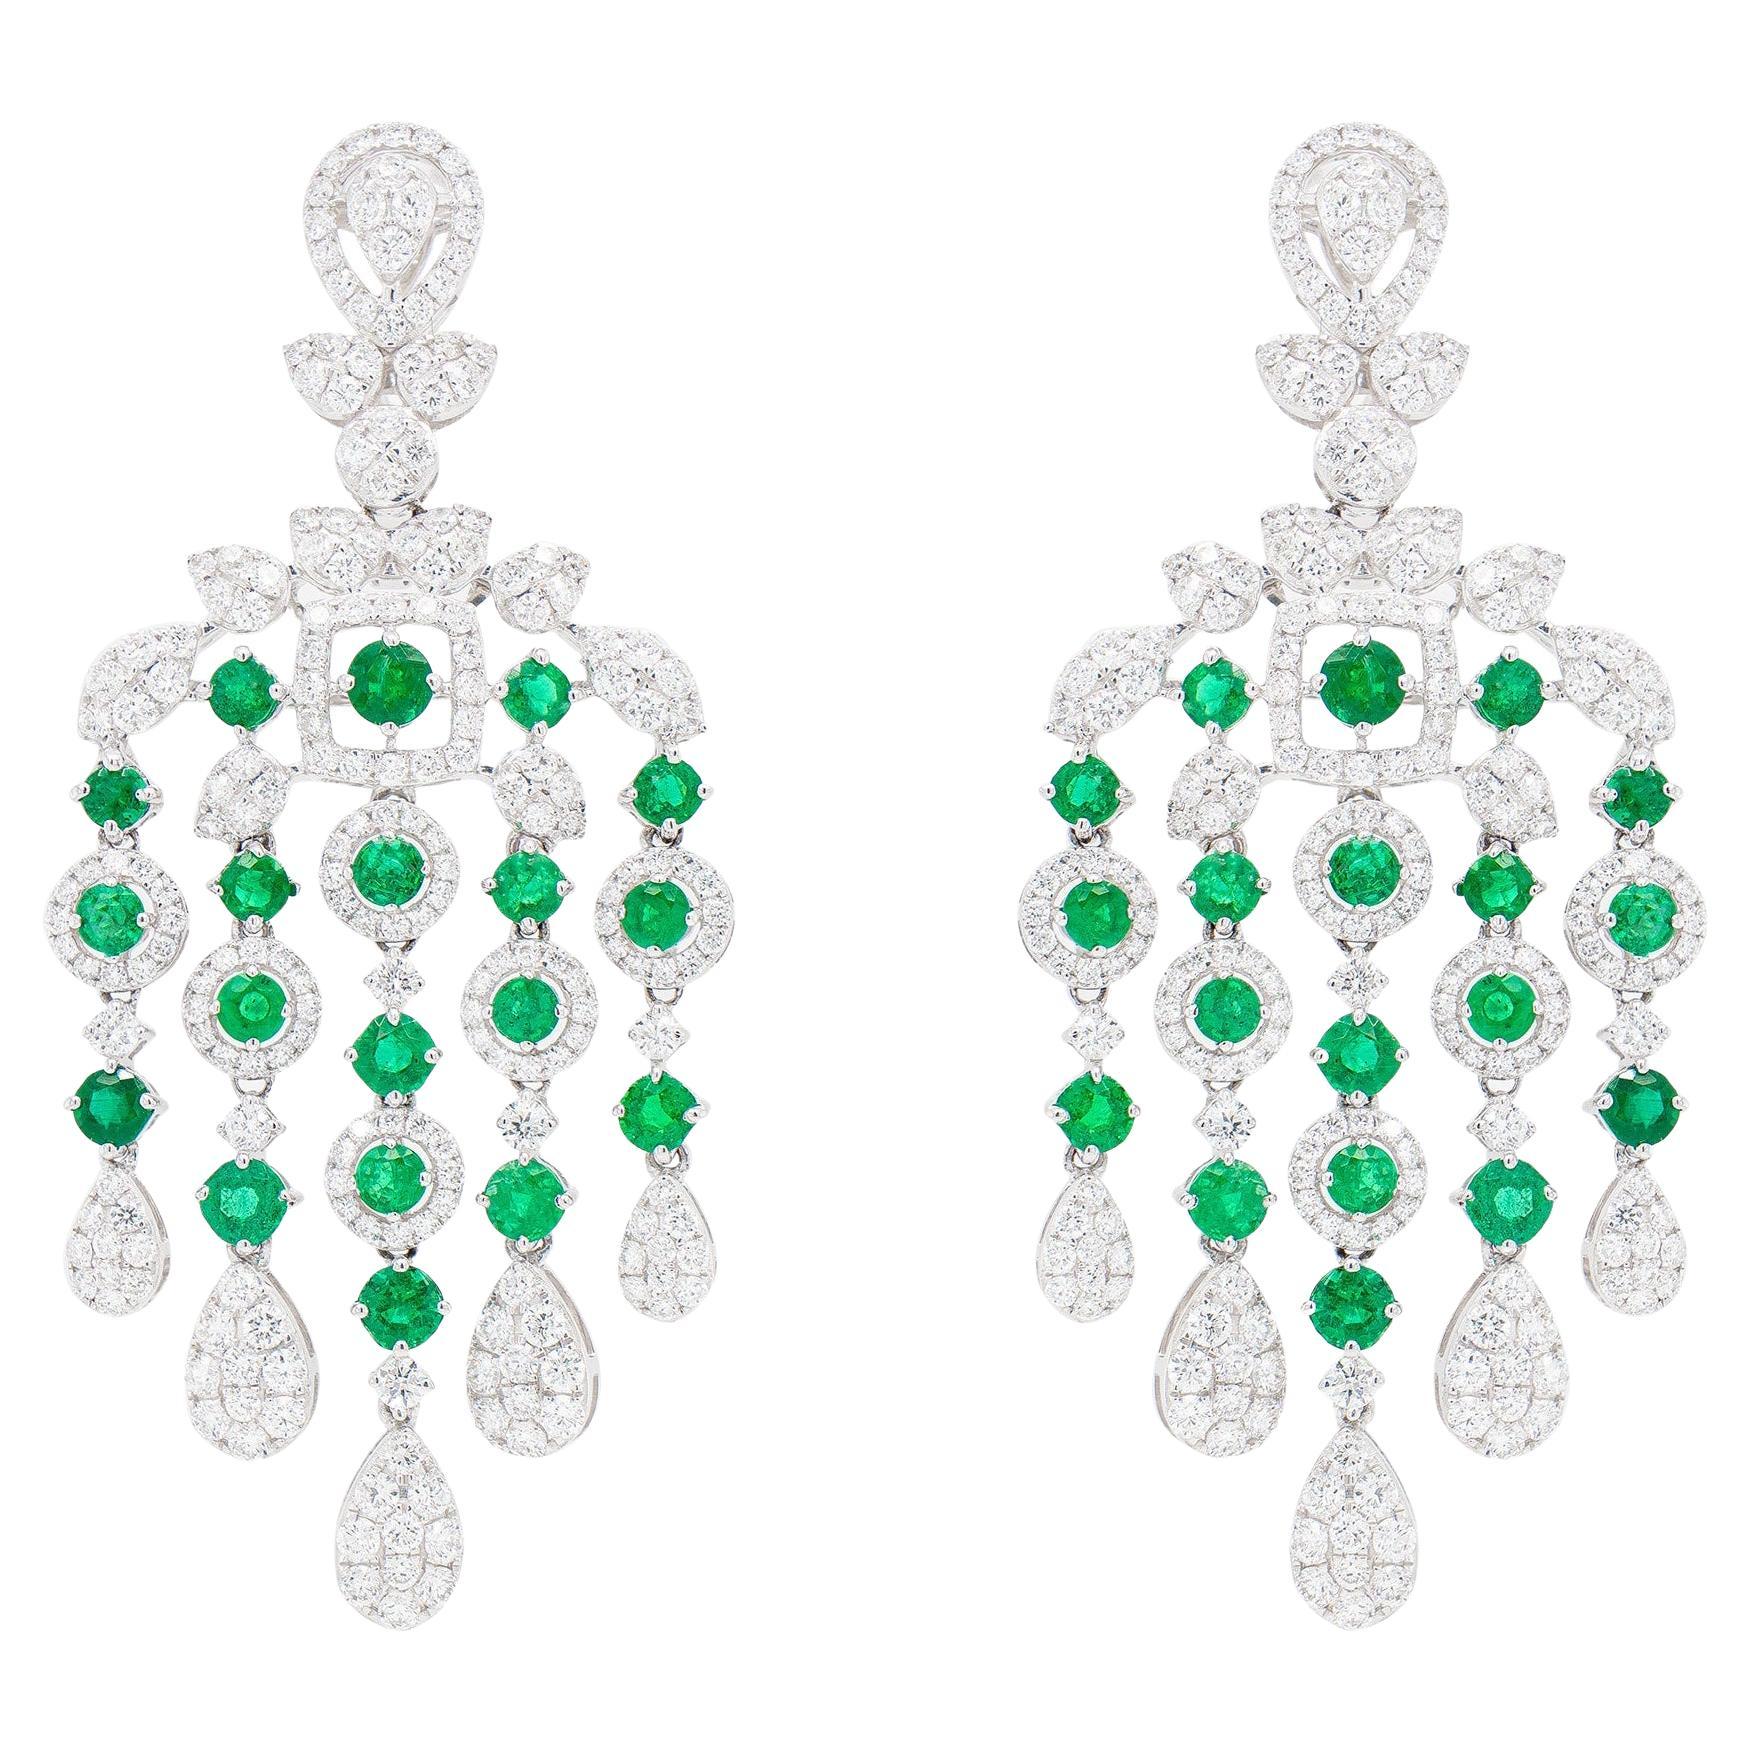 Chandelier Earrings Emeralds 3.46 Carats and Diamonds 3.87 Carats